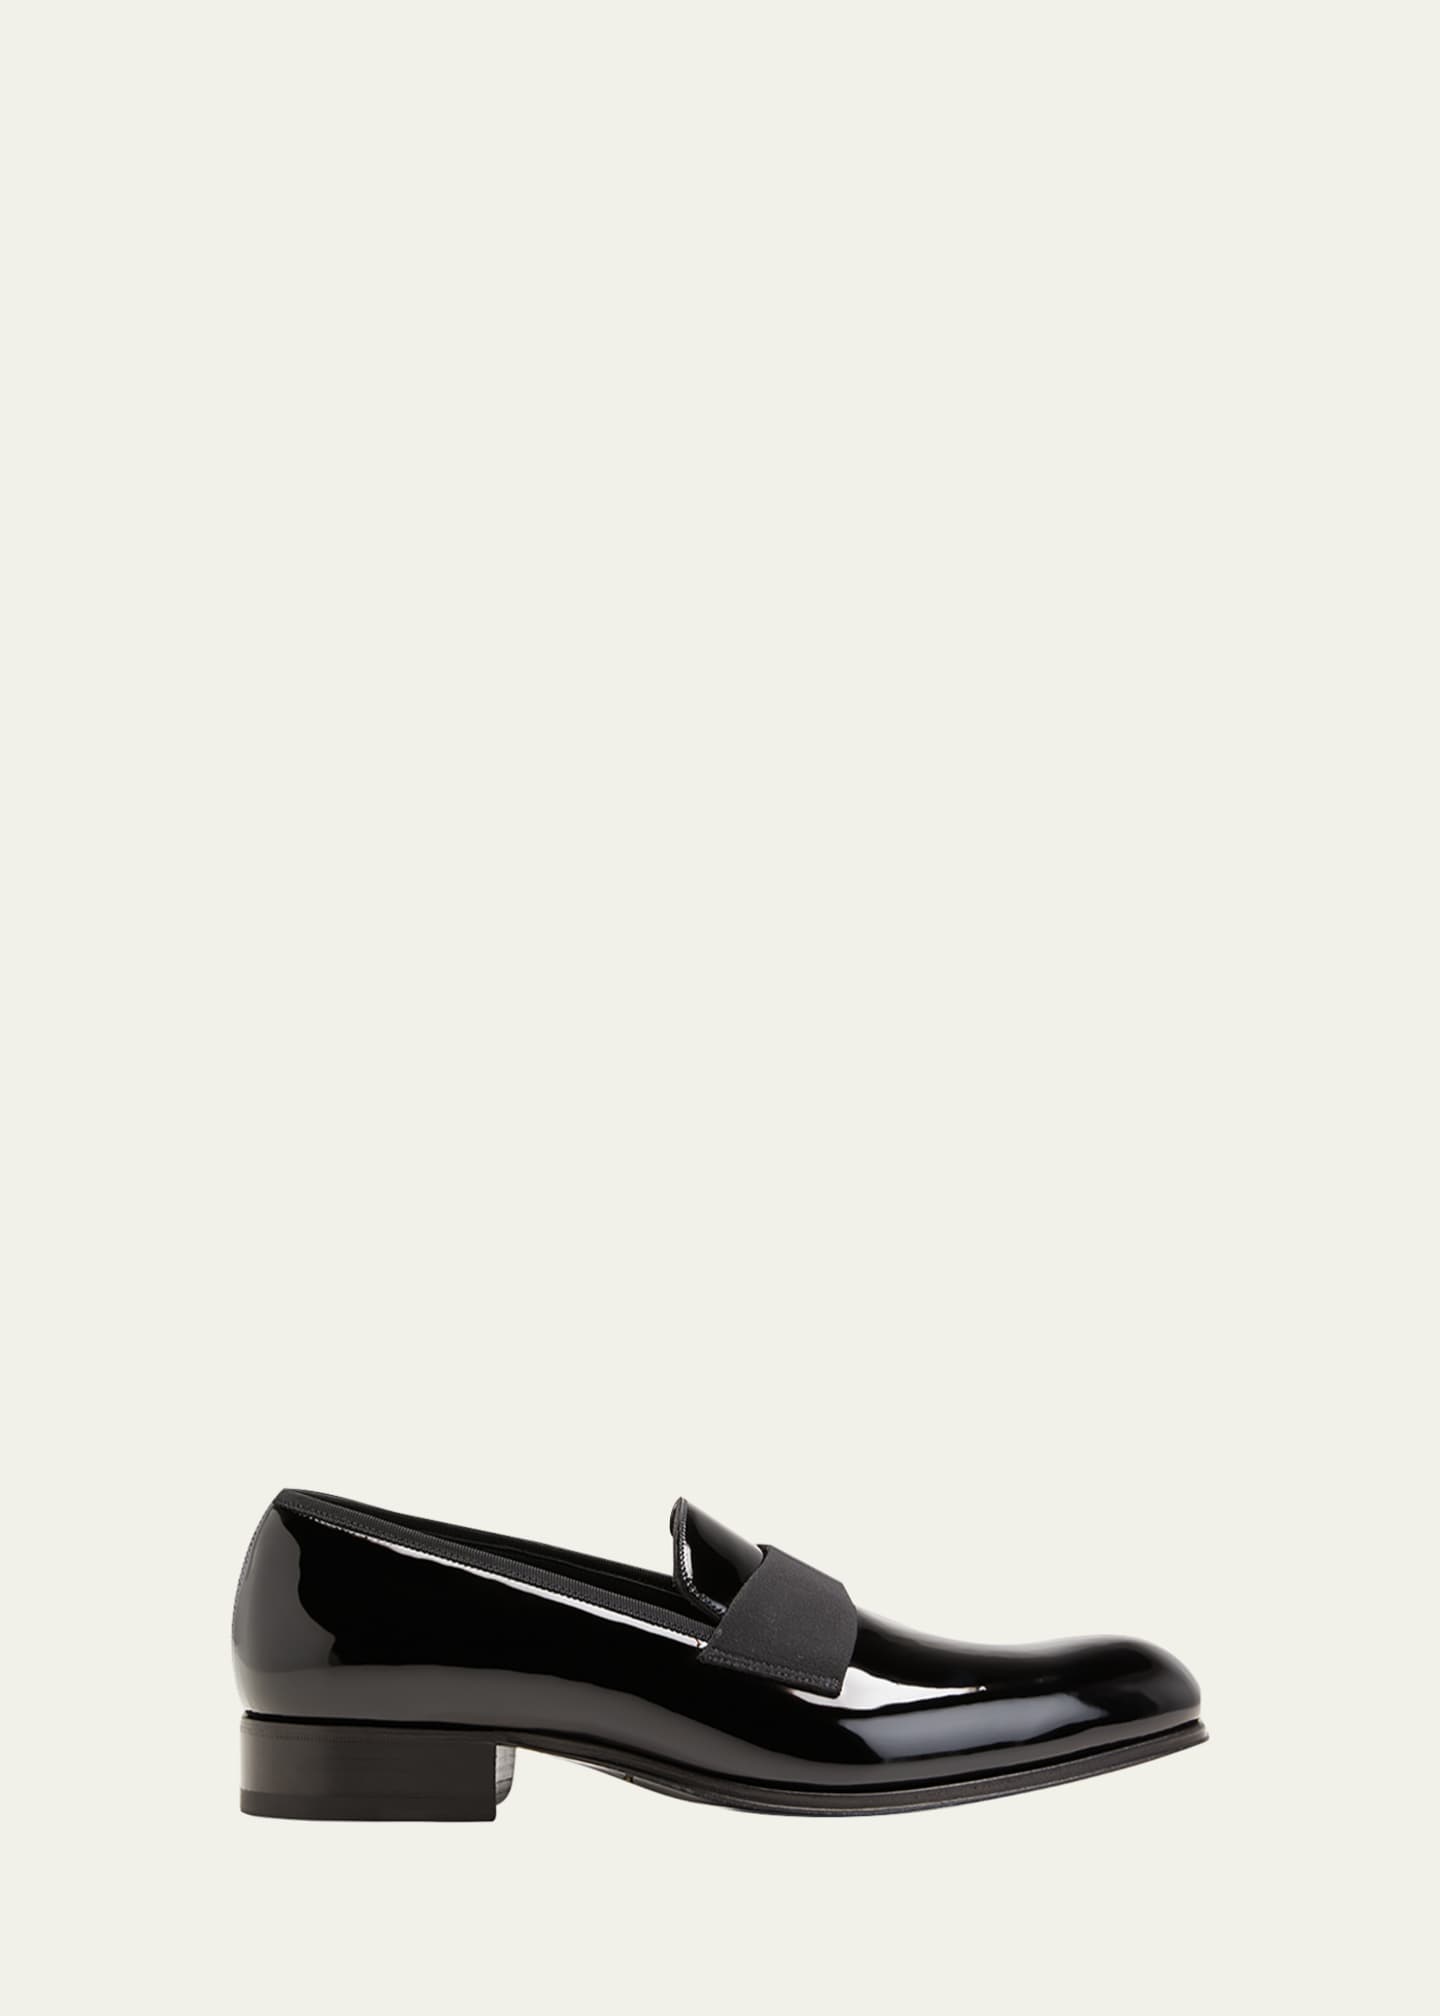 TOM FORD Men's Edgar Patent Leather Loafers - Bergdorf Goodman